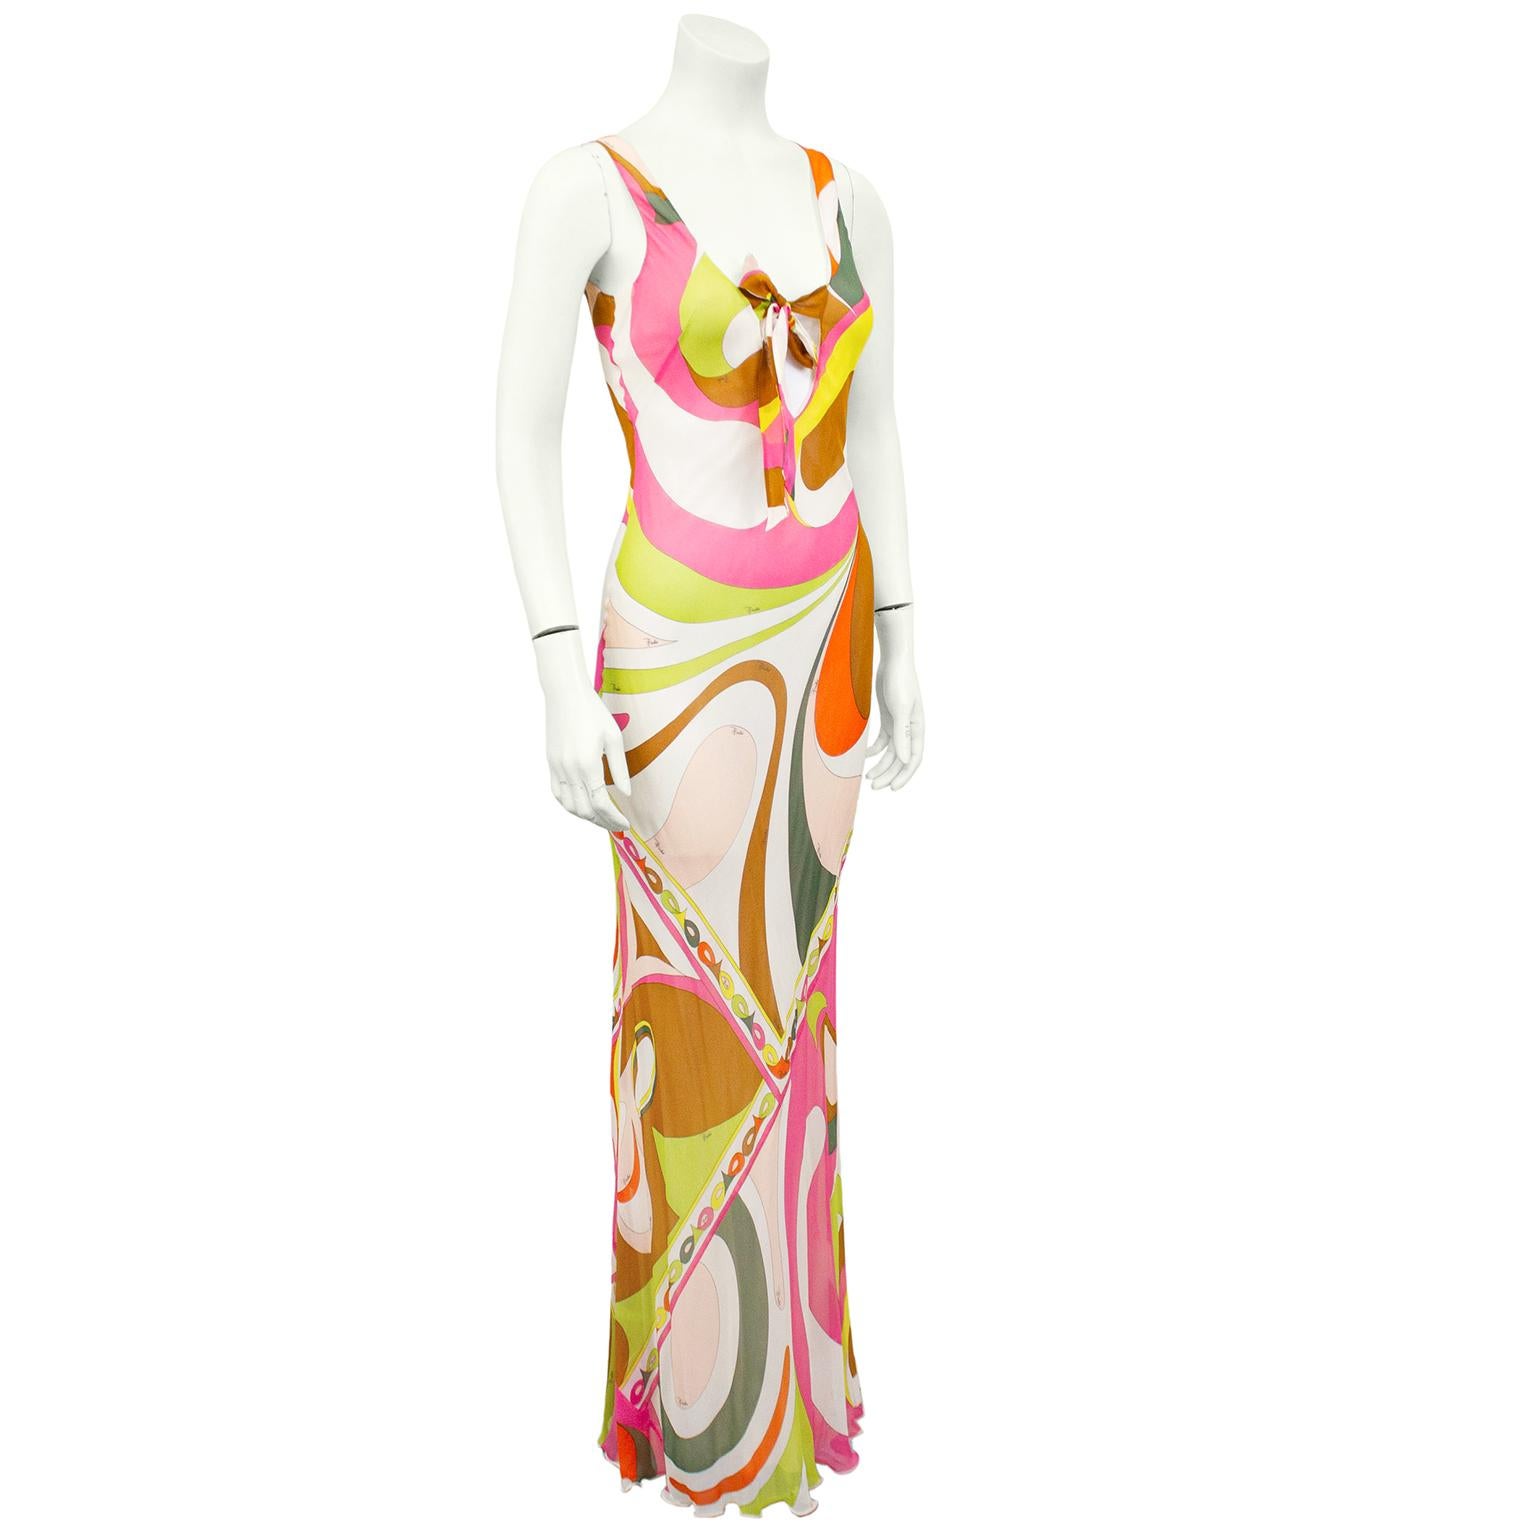 1990s colourful Emilio Pucci sleeveless chiffon gown. Features shades of pink, green, brown and orange. Plunging v neckline with a tie across. Sheer with white chiffon lining. Signed fabric. Very sexy. Excellent vintage condition, fits likes a US